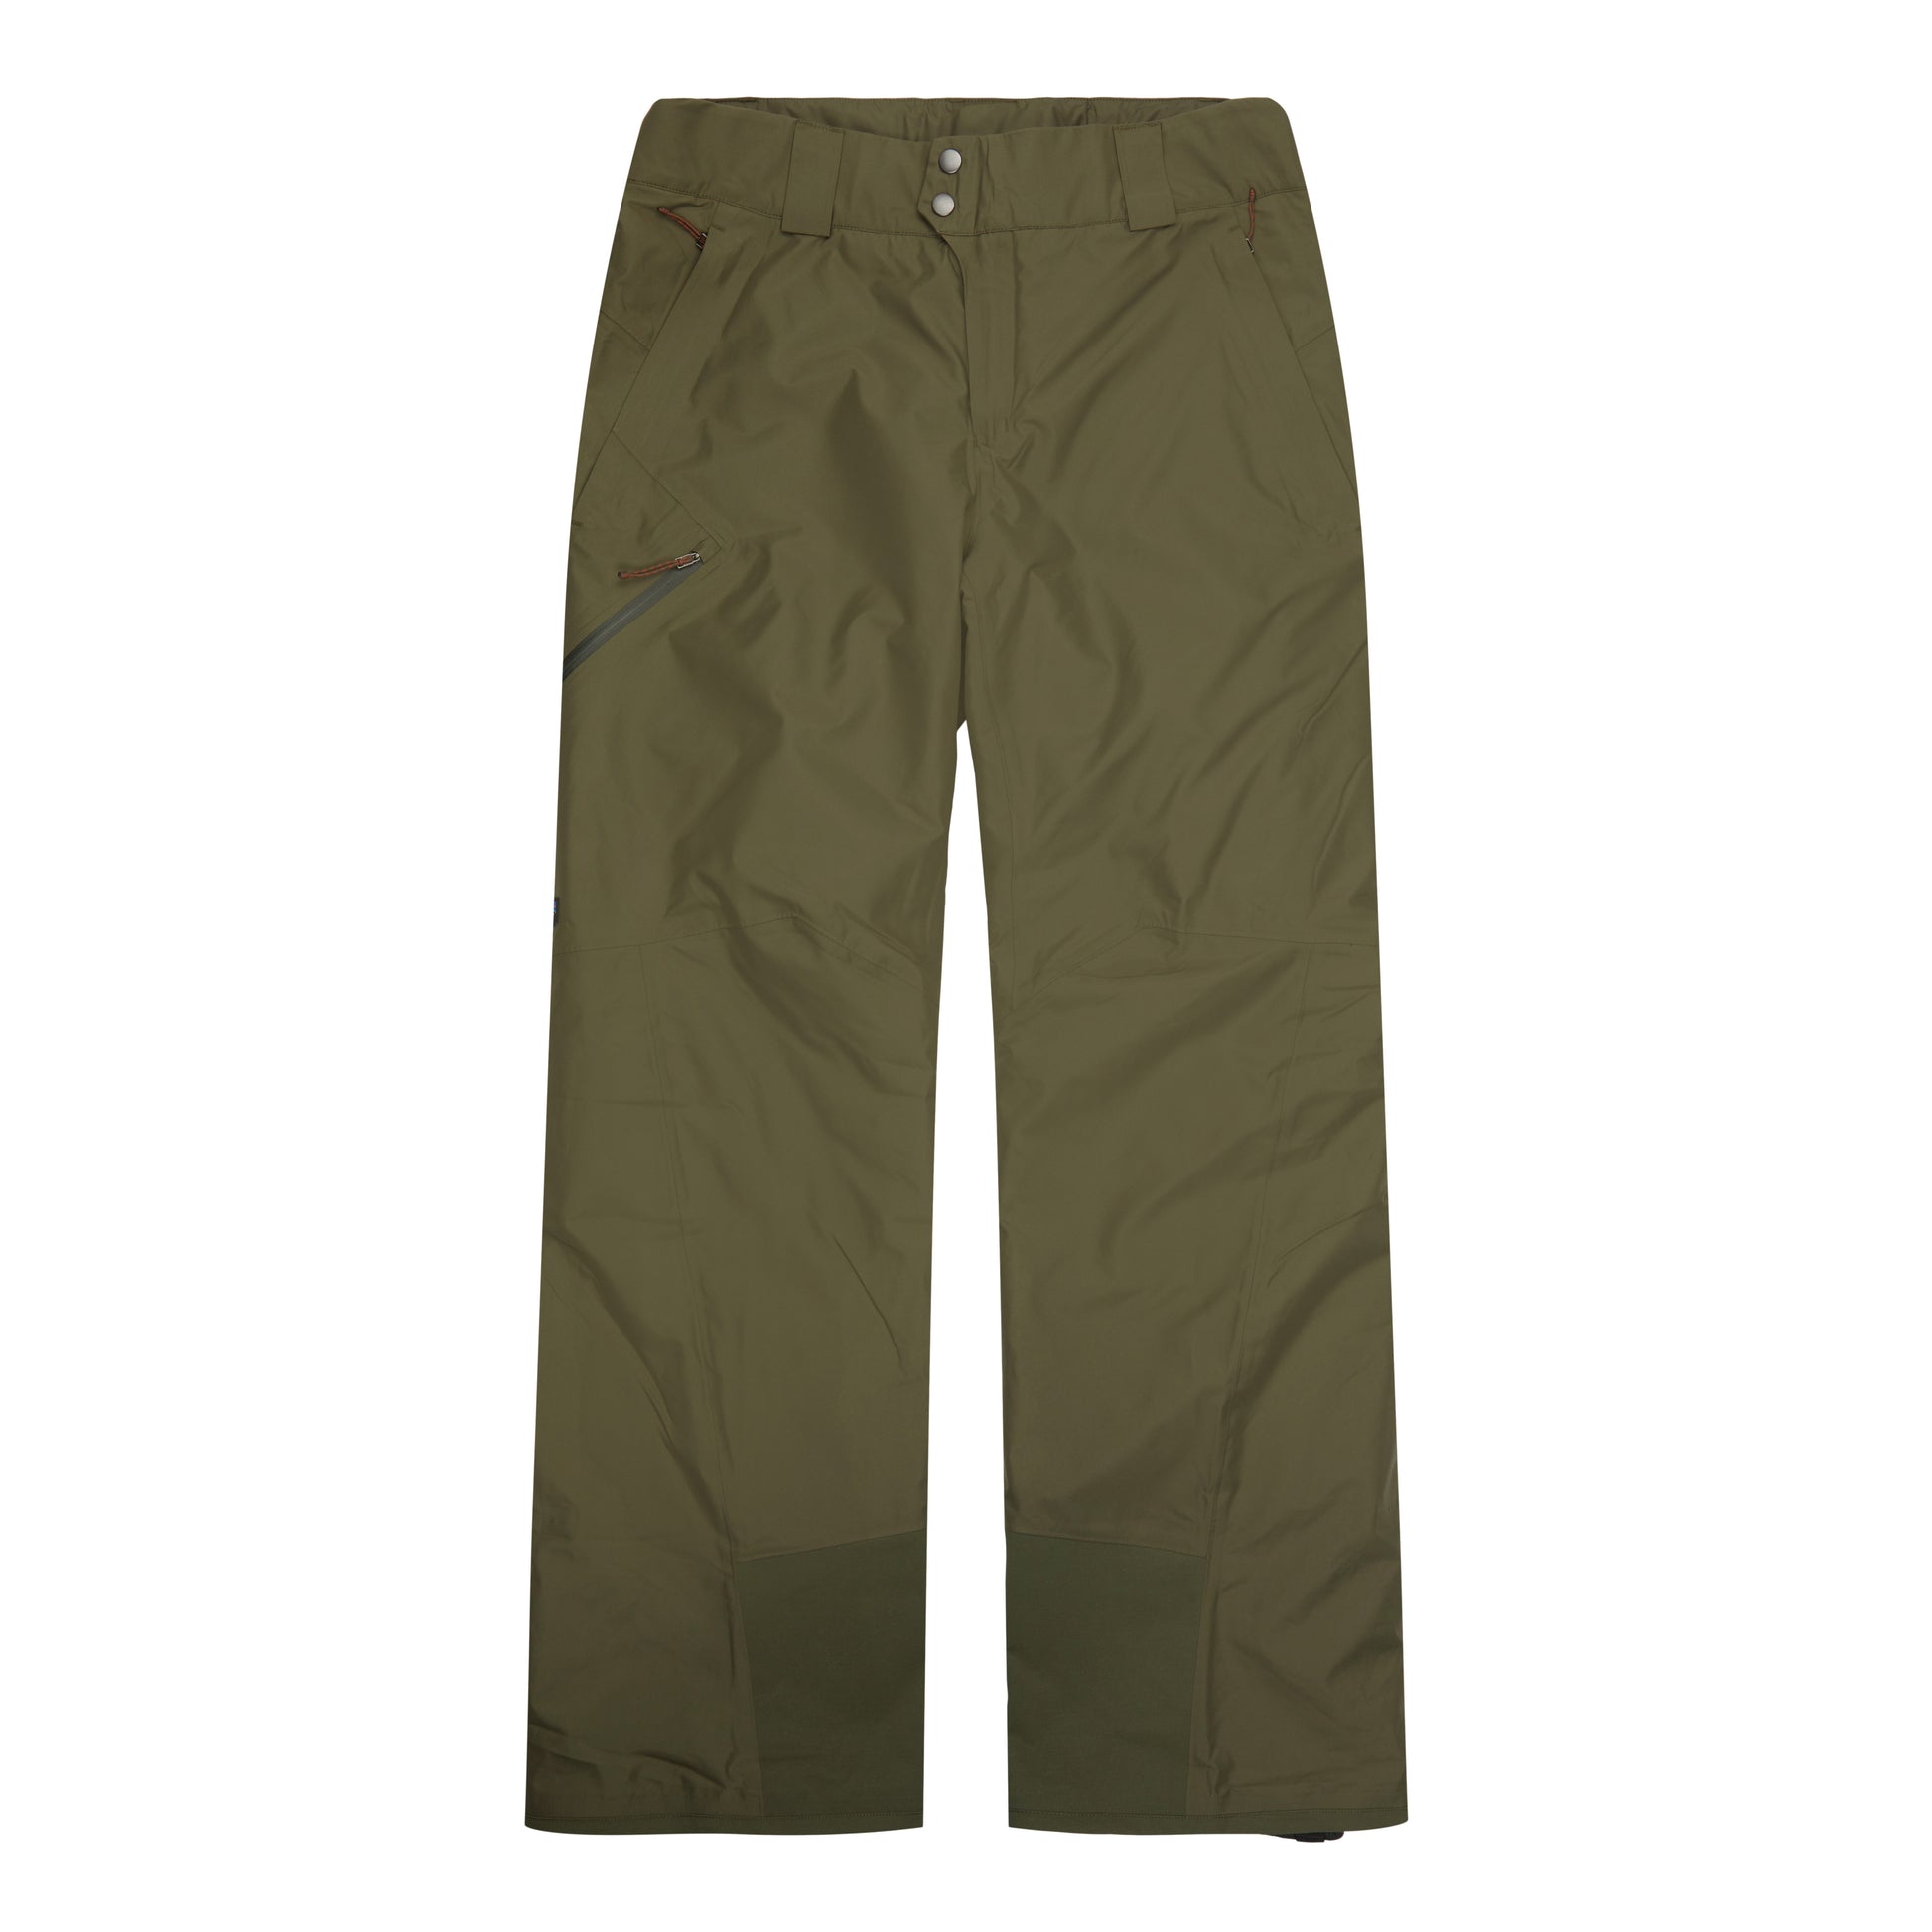 Men's Insulated Powder Town Pant